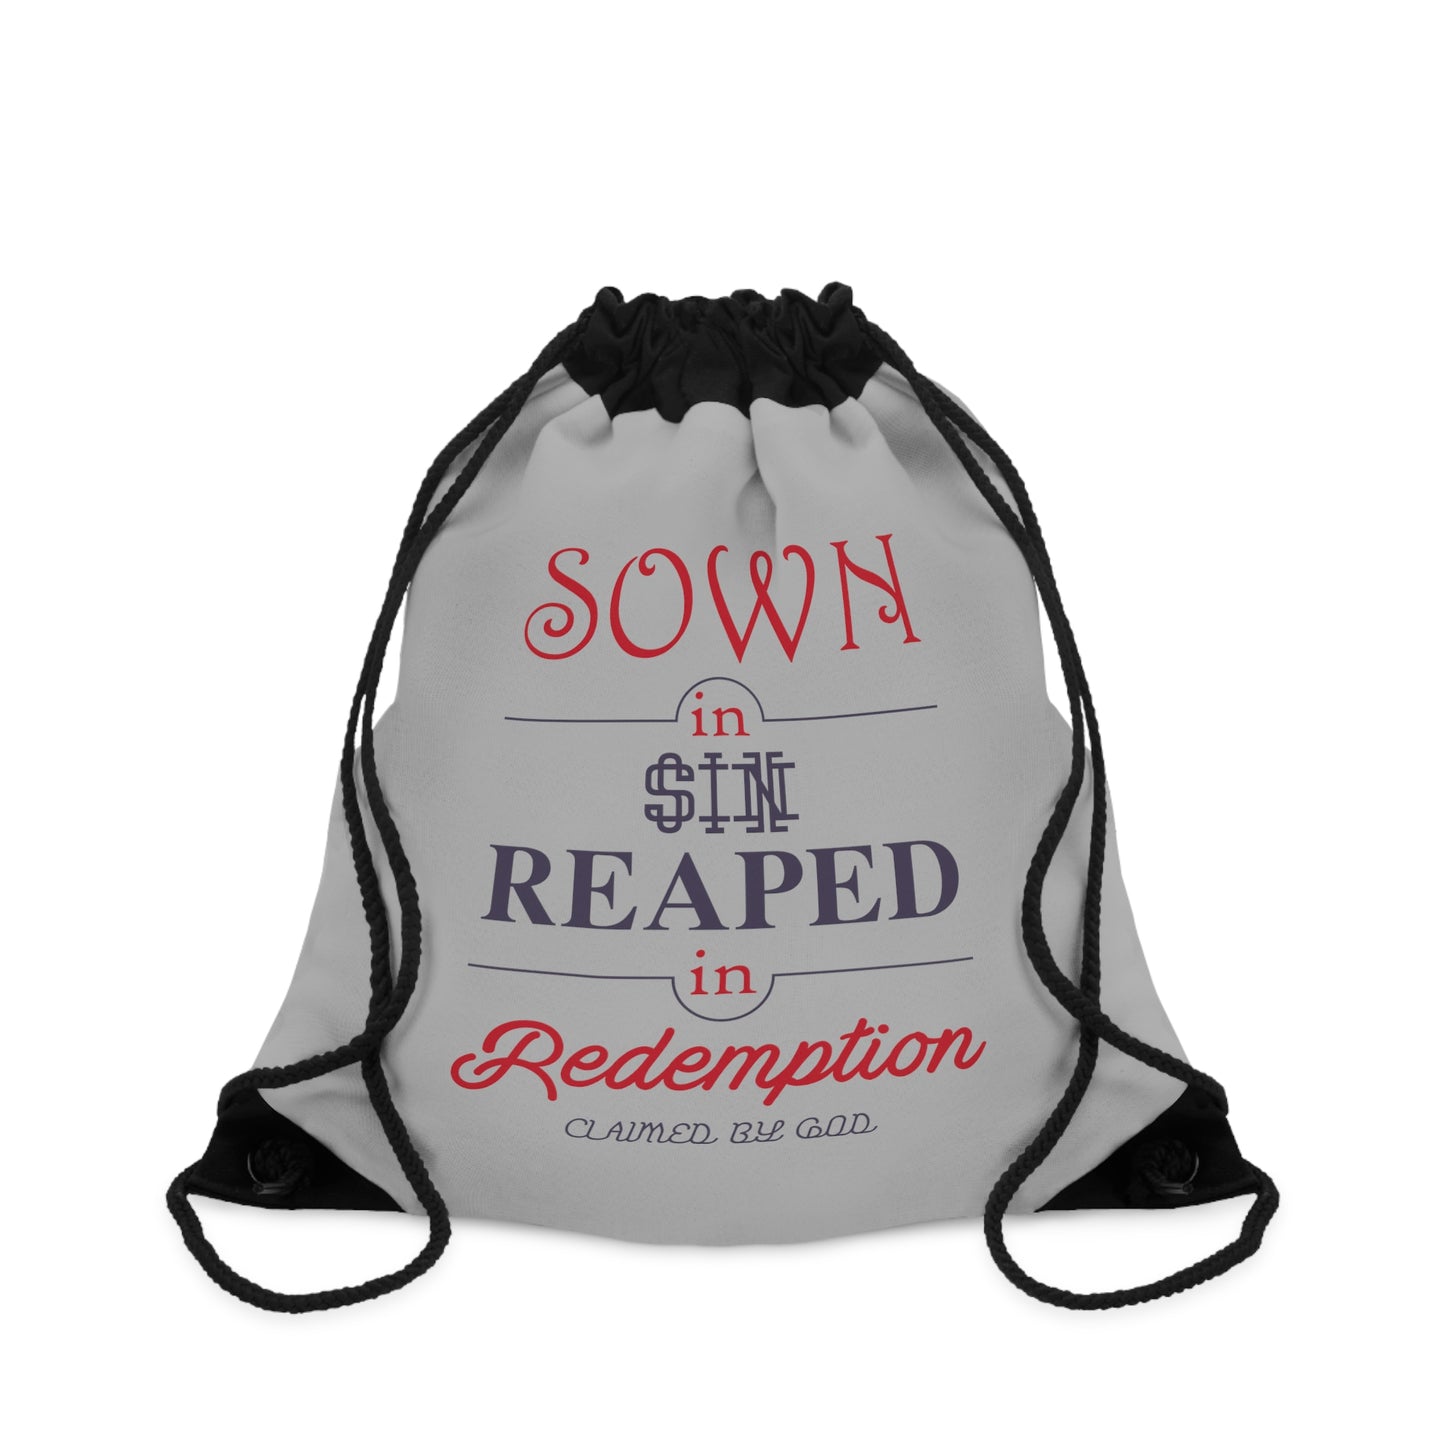 Sown In Sin Reaped In Redemption Drawstring Bag